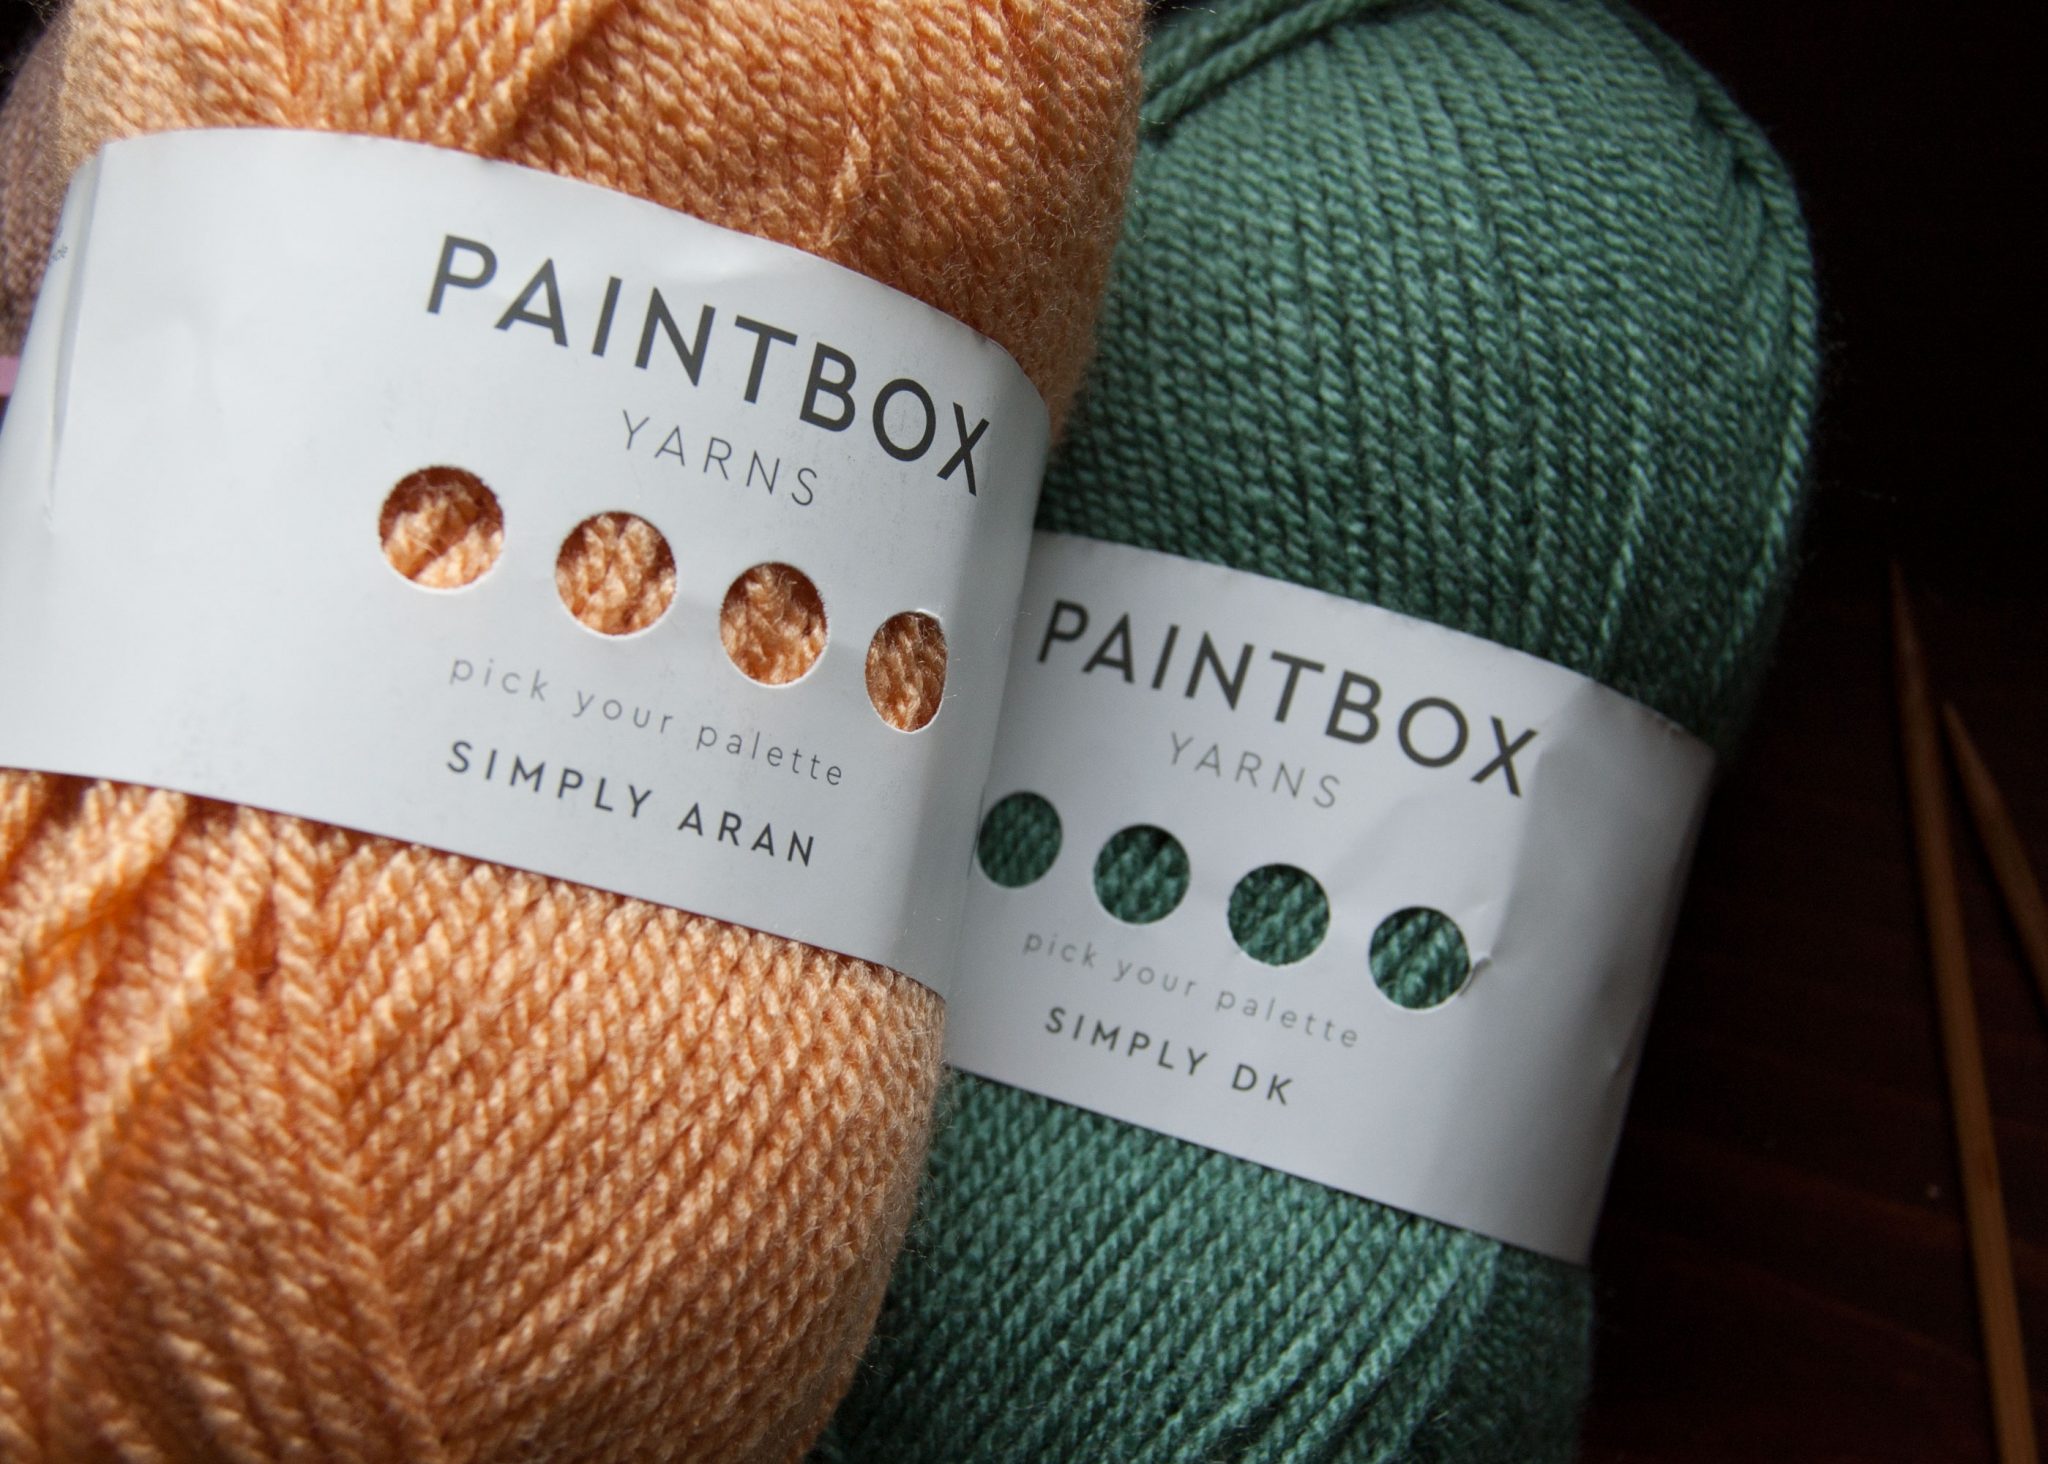 Paintbox Simply Cotton Yarn Review